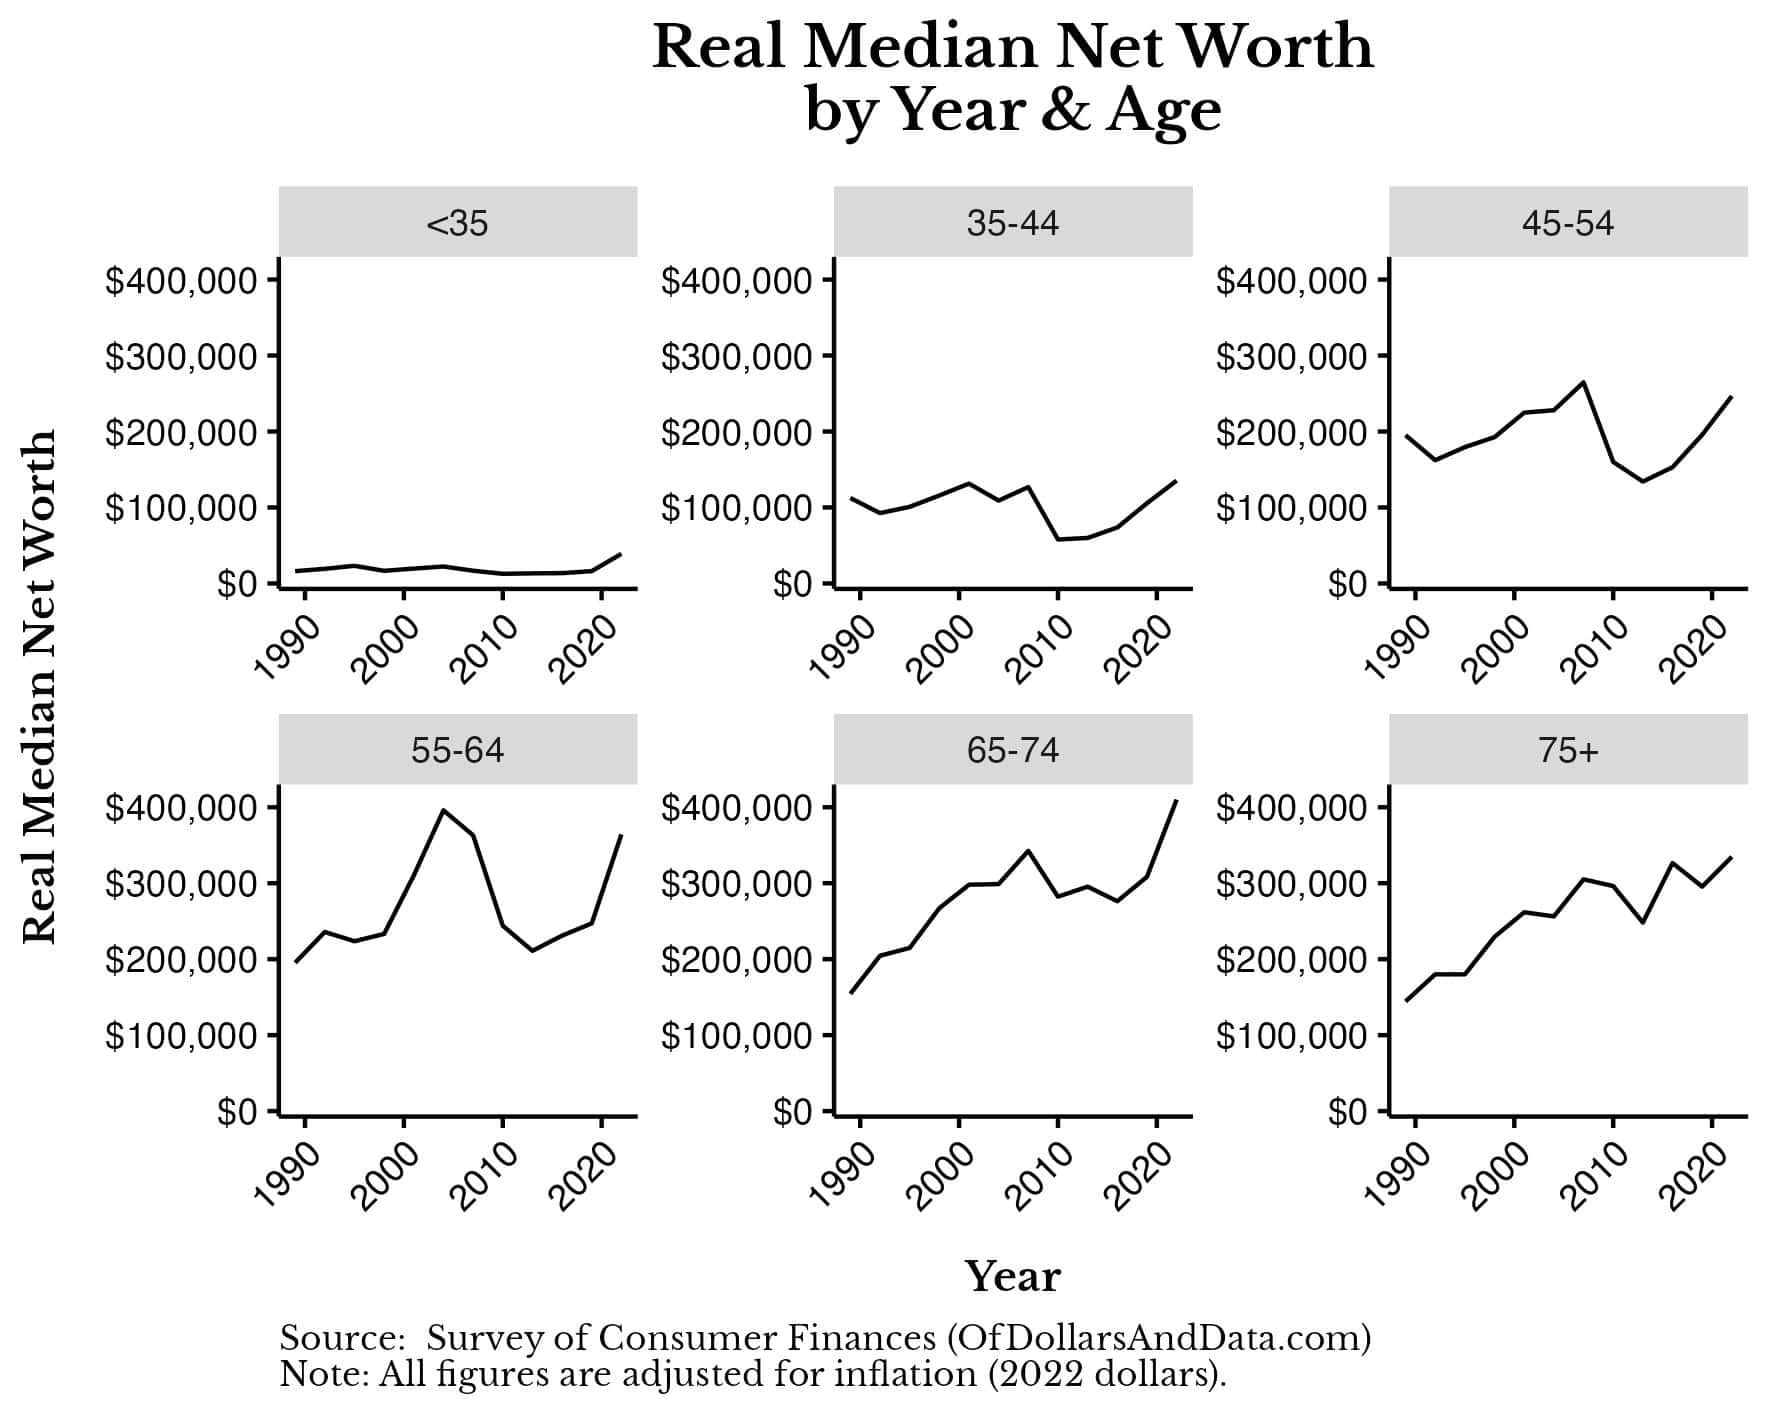 Chart showing median net worth of U.S. households by each year and age group in the SCF data.